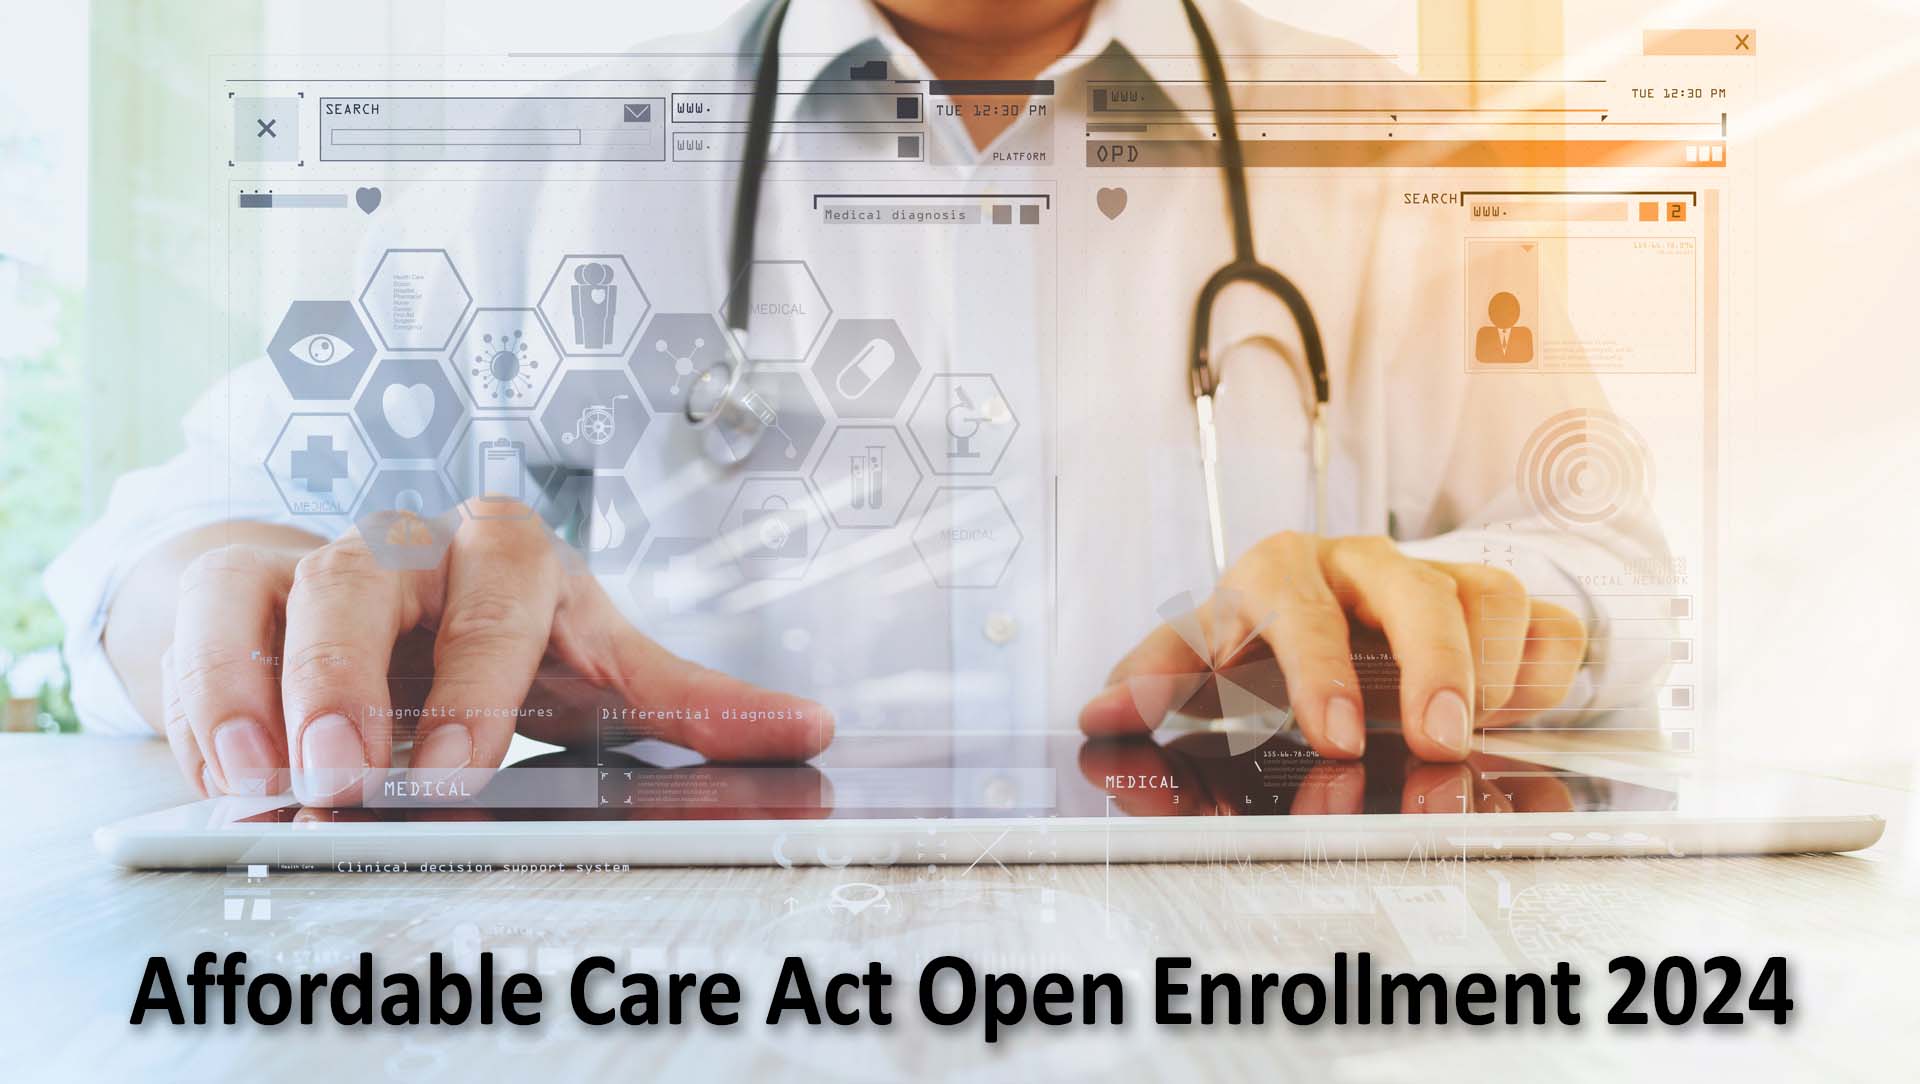 Open Enrollment for the Affordable Care Act Health Insurance Marketplace for 2024 Direct